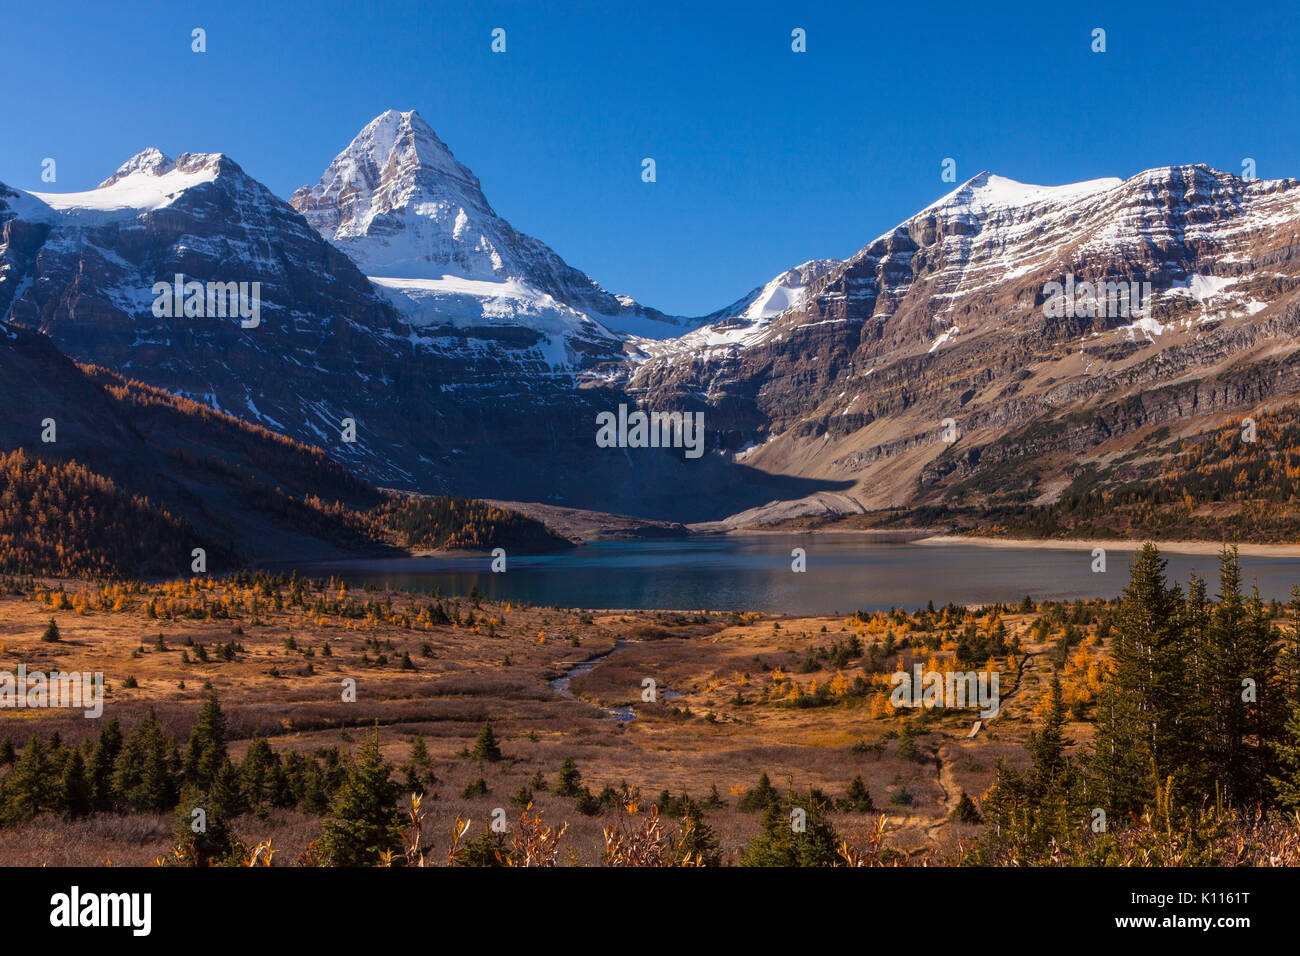 Mount Assiniboine from Lake Magog in fall, Mount Assiniboine Provinicial Park, Rocky Mountains, British Columbia, Canada. Stock Photo